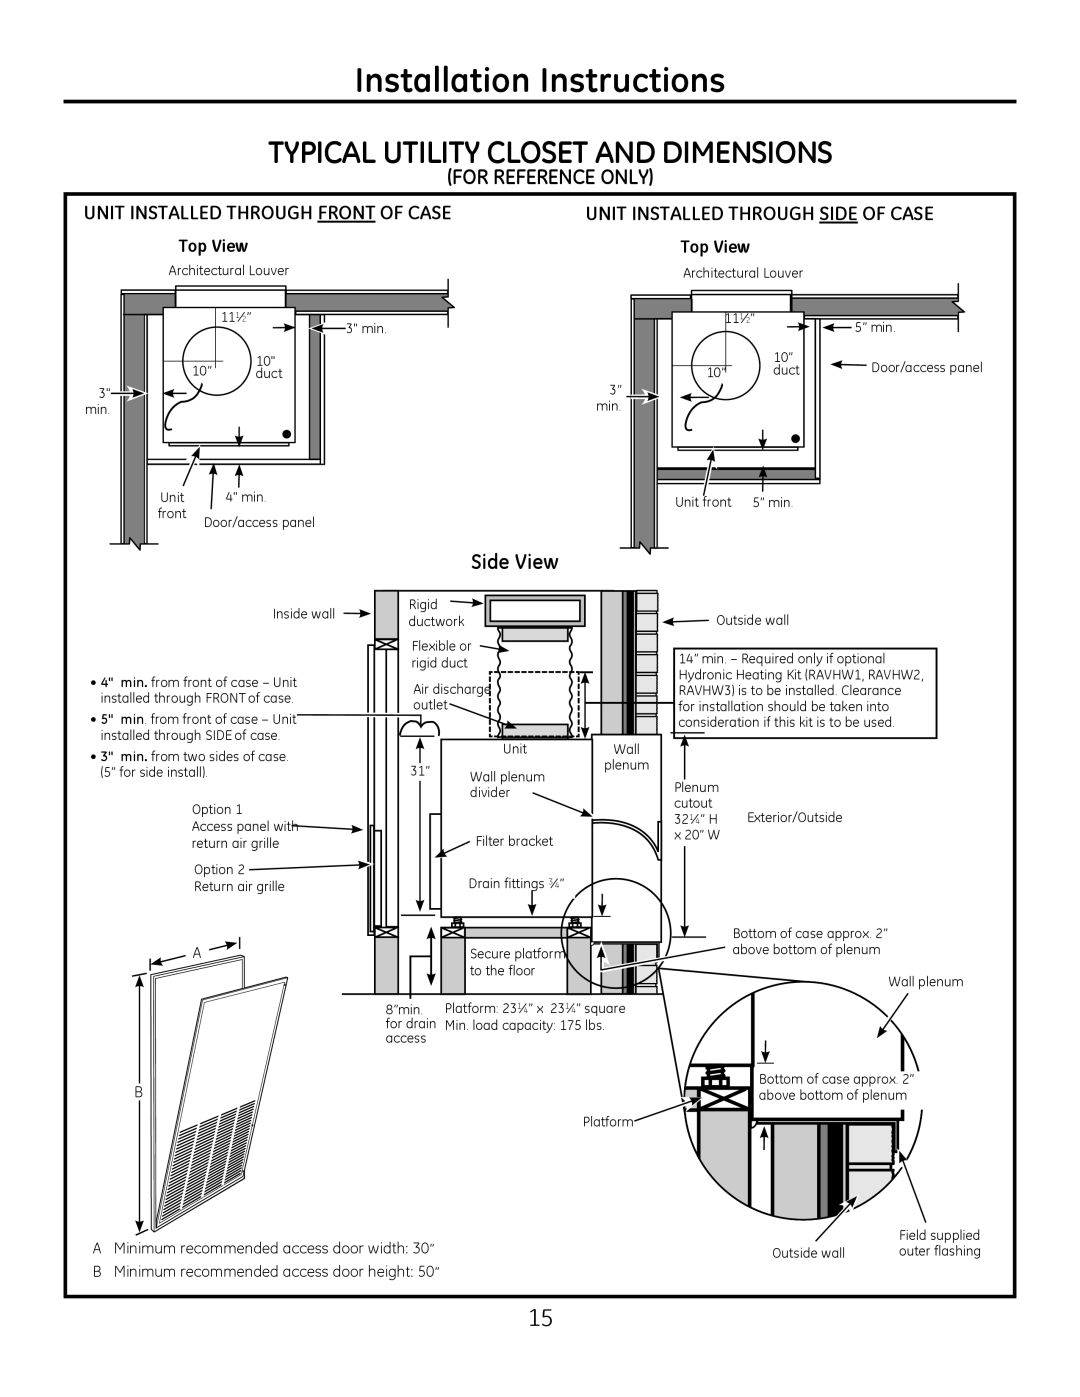 GE 8500 Series Typical Utility Closet And Dimensions, For Reference Only, Side View, Unit Installed Through Front Of Case 